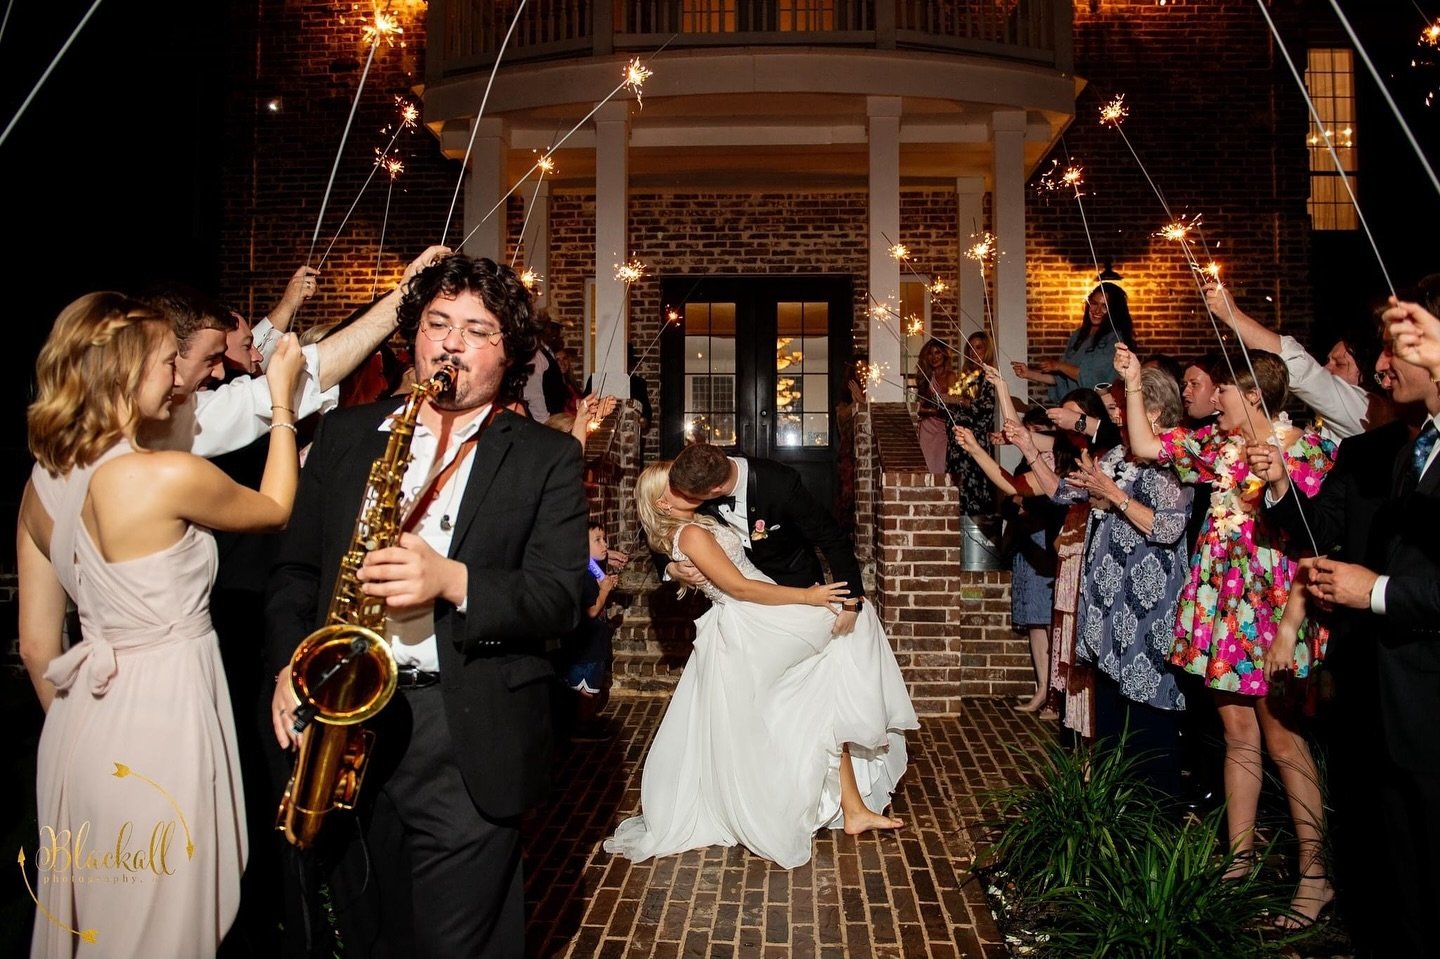 Picture yourself basking in the glow of your most memorable day, winding down with a charming exit illuminated by twinkling sparklers. As you reach your vintage getaway car, you&rsquo;re serenaded by the soulful melody of a saxophone, playing none ot